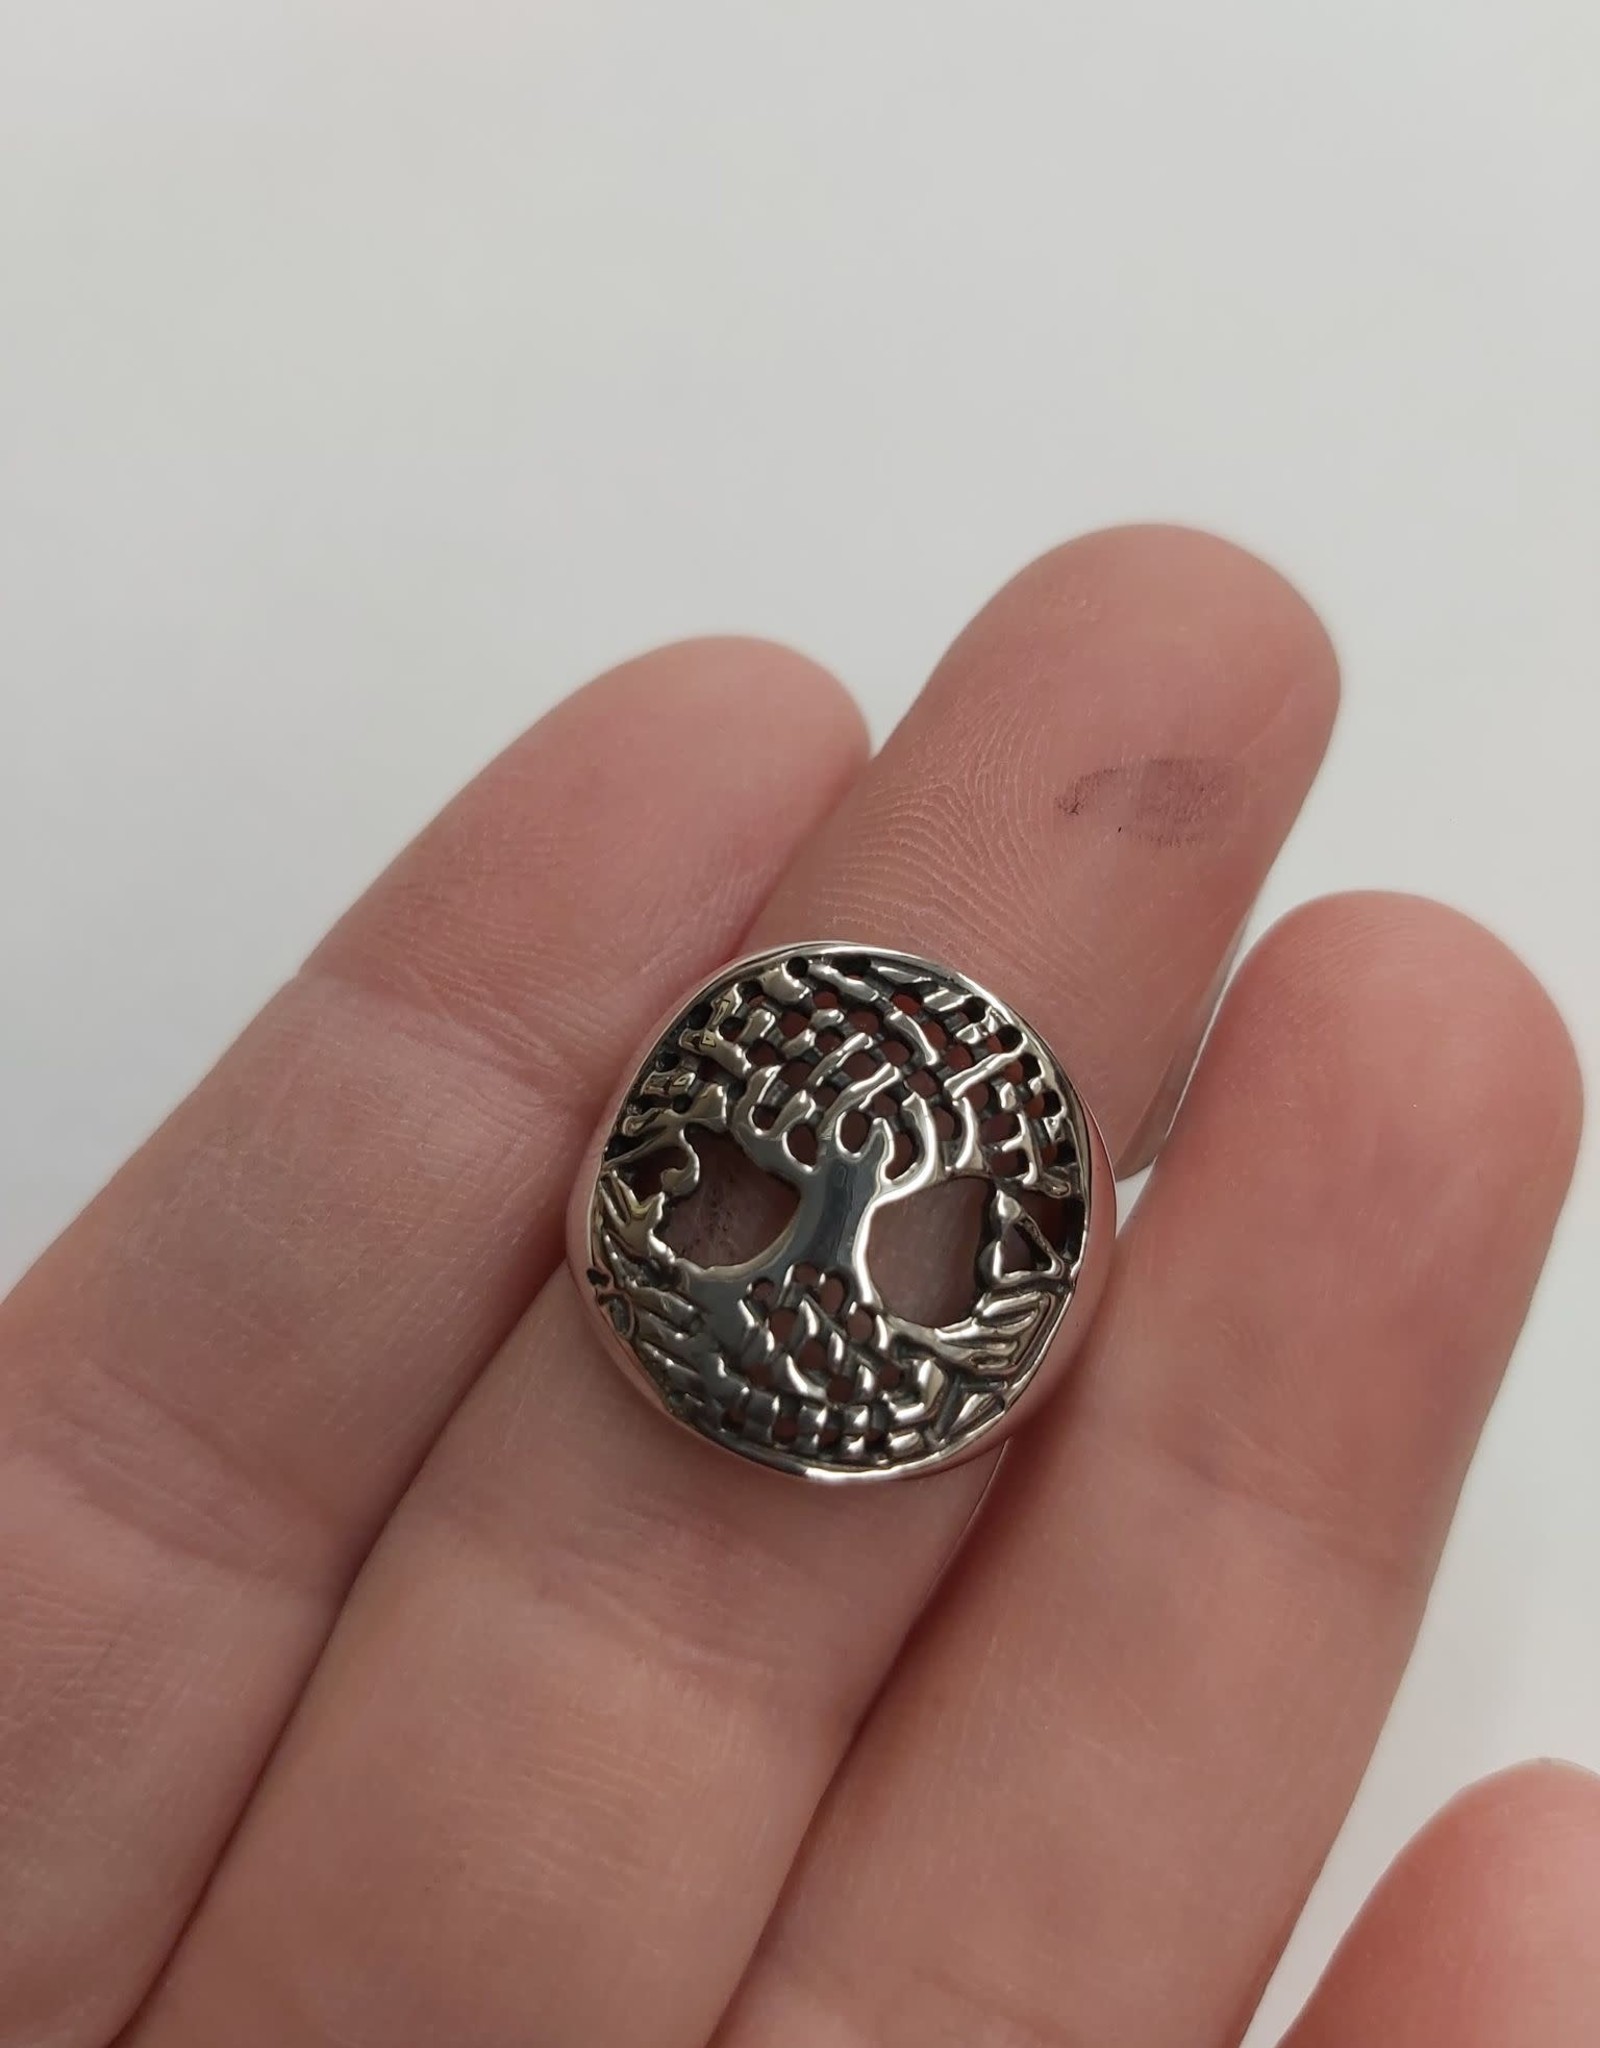 Tree Ring B - Size 7 Sterling Silver